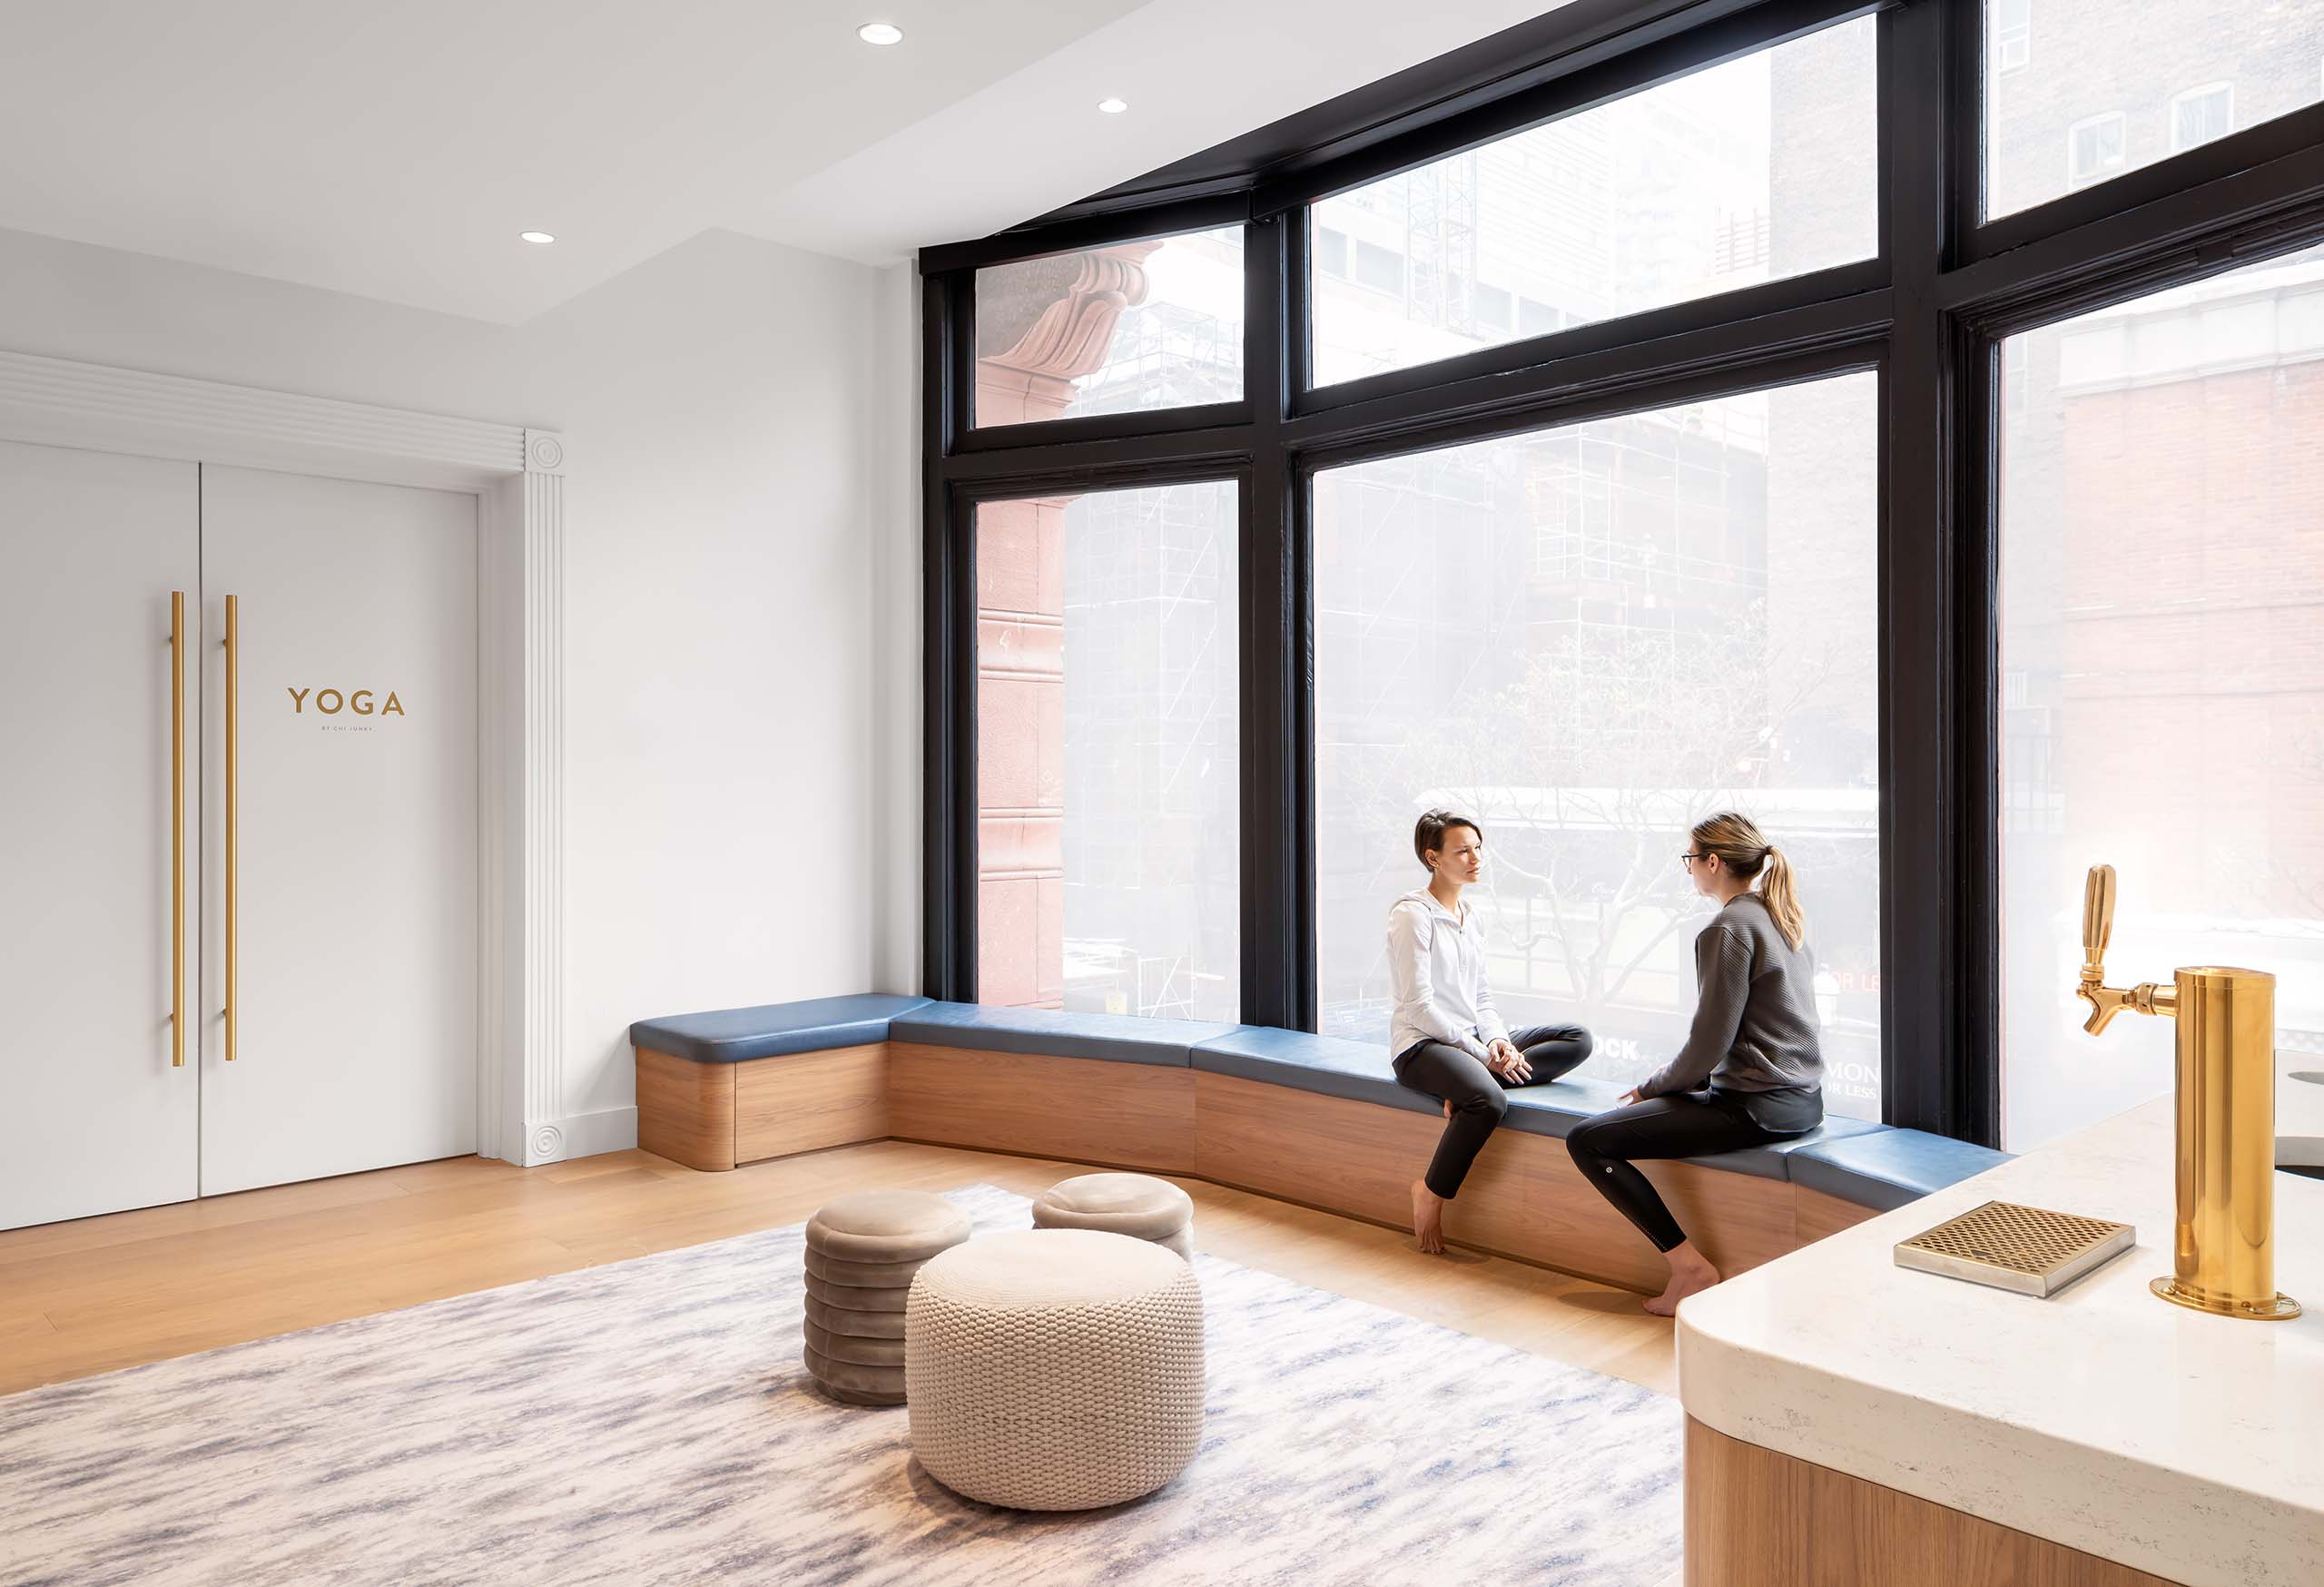 Sweat and Tonic yoga studio interior with 2 people talking by the window, located in Toronto ON, fitness architecture and design by Cutler